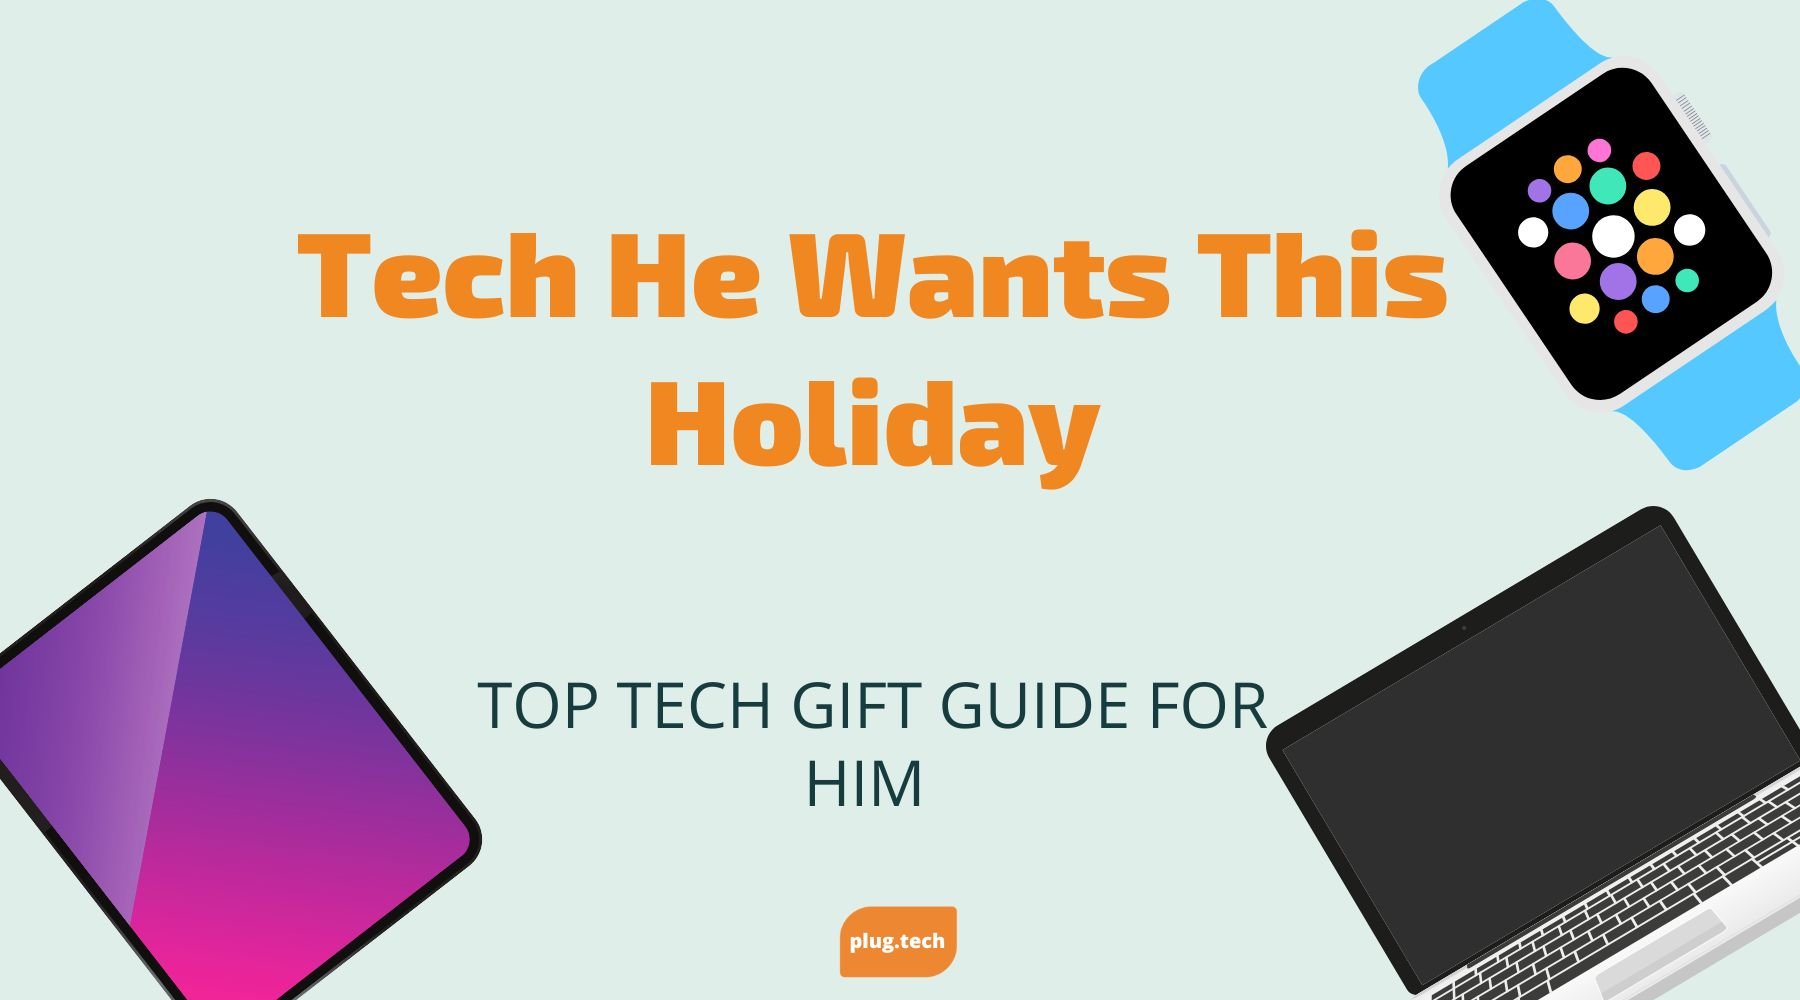 Holiday Gift Guide 2022 - Top tech gift guide for him (boyfriend or husband)